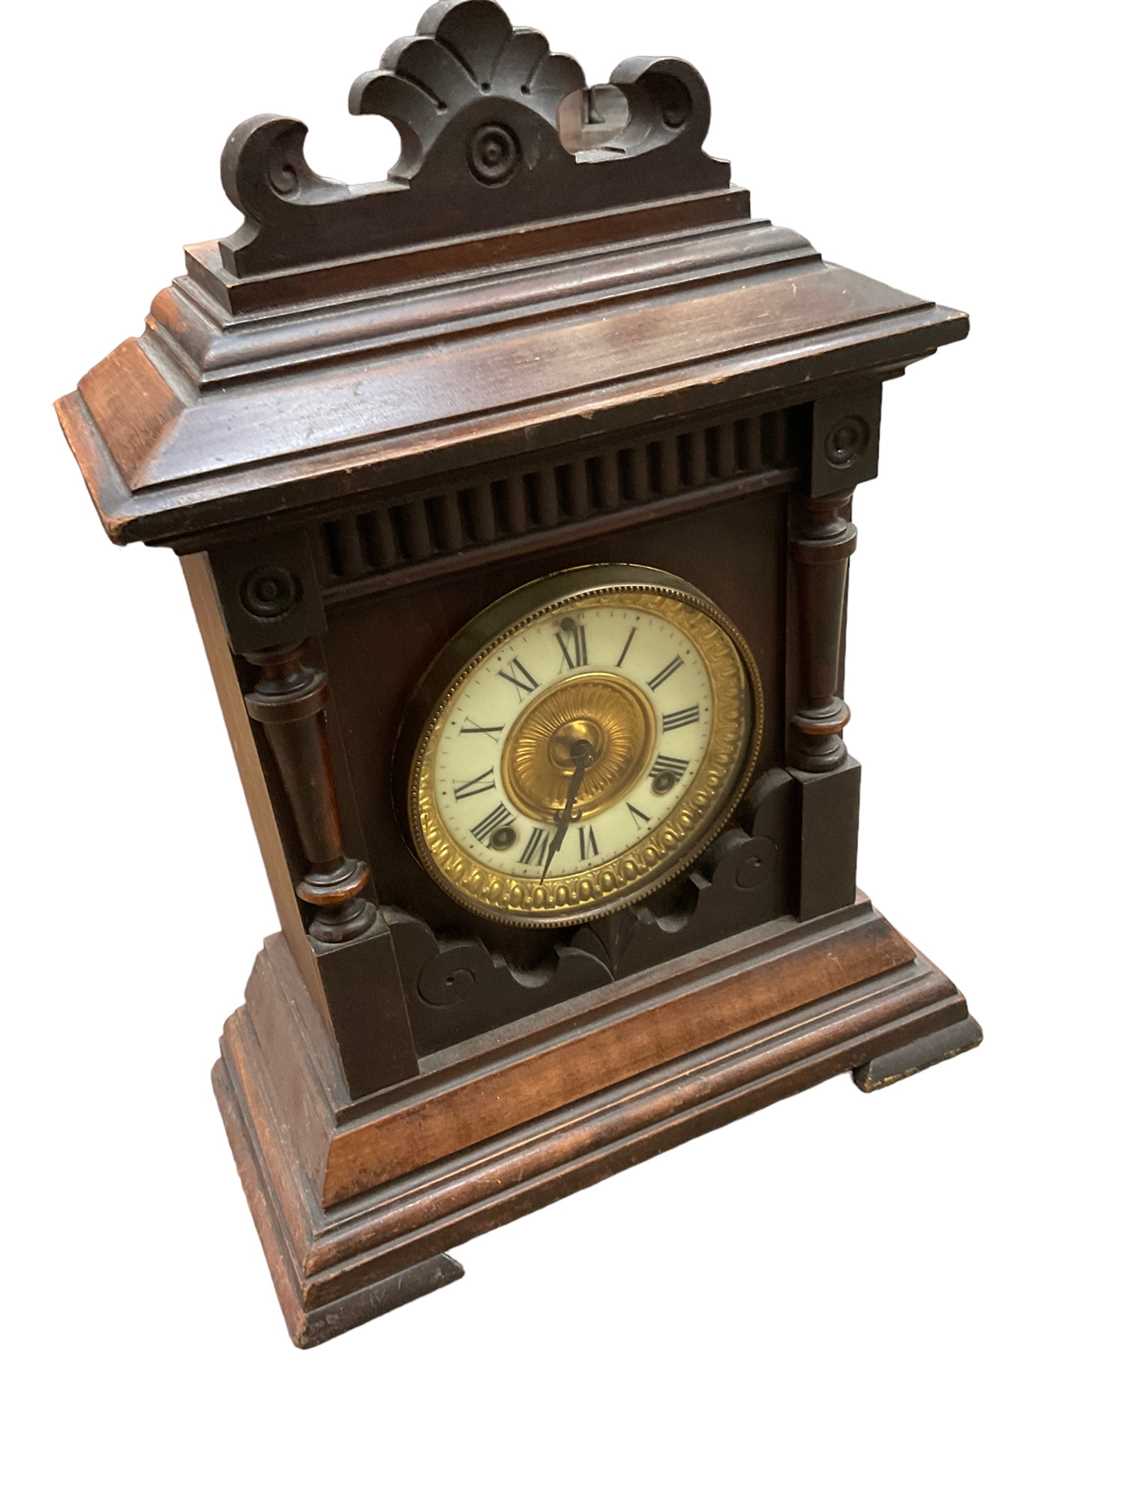 Lot 34 - Early 20th century wooden cased mantel clock, by Ansonia